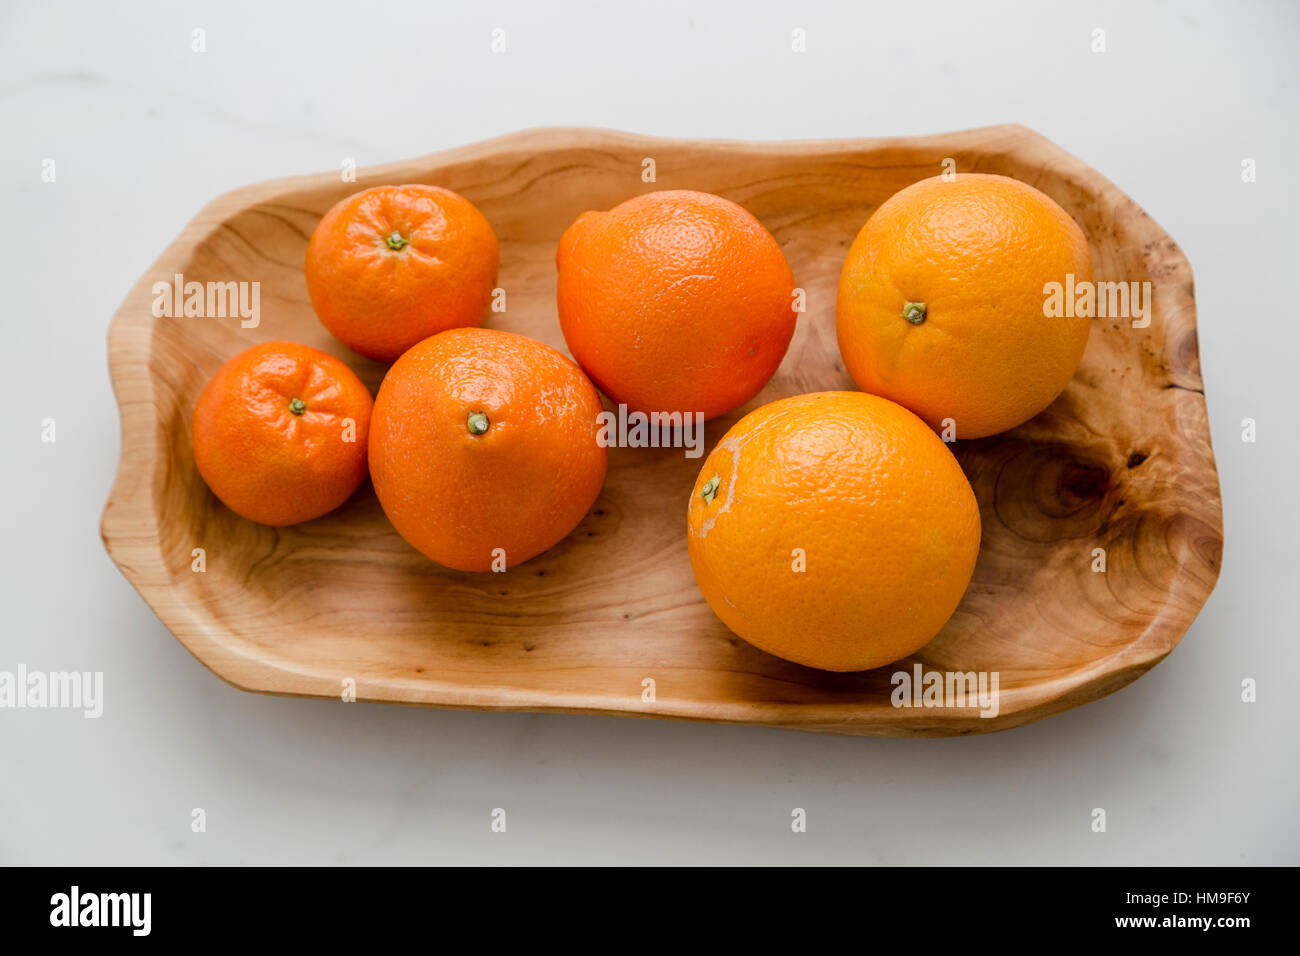 A hand carved wooden bowl with organic oranges and tangerines Stock Photo